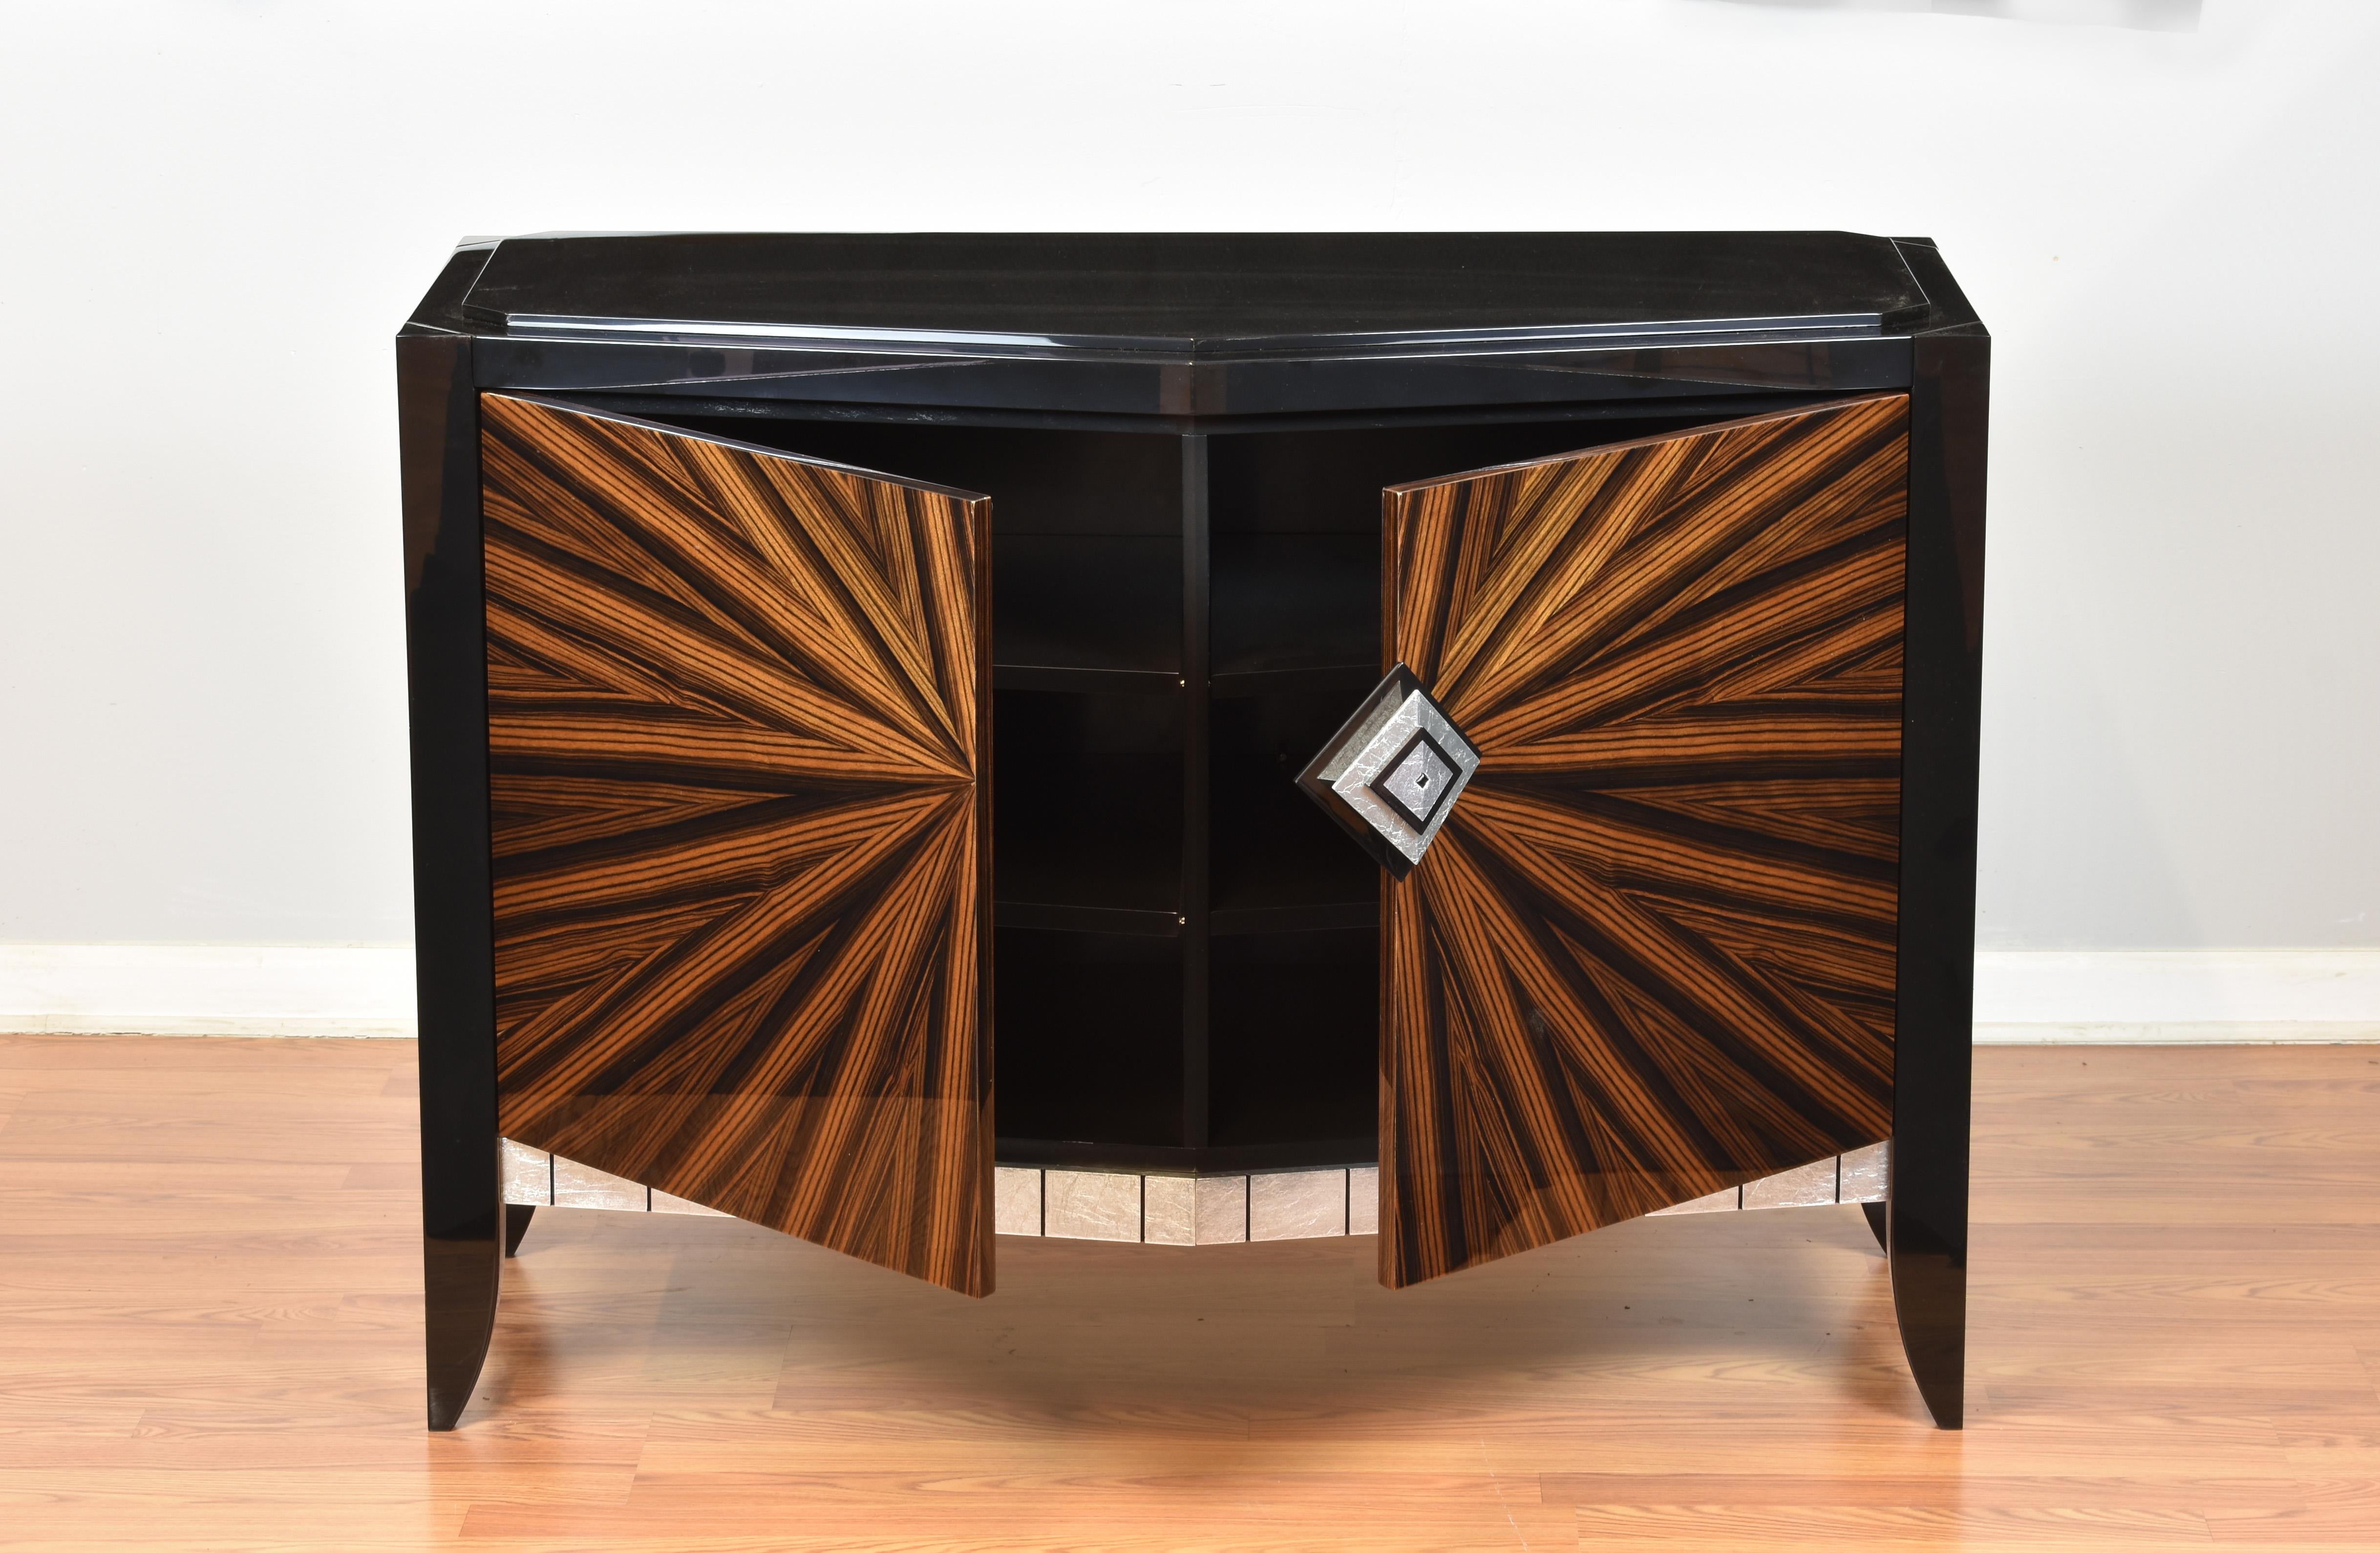 Chevron accent cabinet Chicago version is part of the Chevron series. It has a black granite top which complement the starbust ebony macassar door fronts There are jet black maple legs and leg tops which highlight the silver leaf bottom trim with